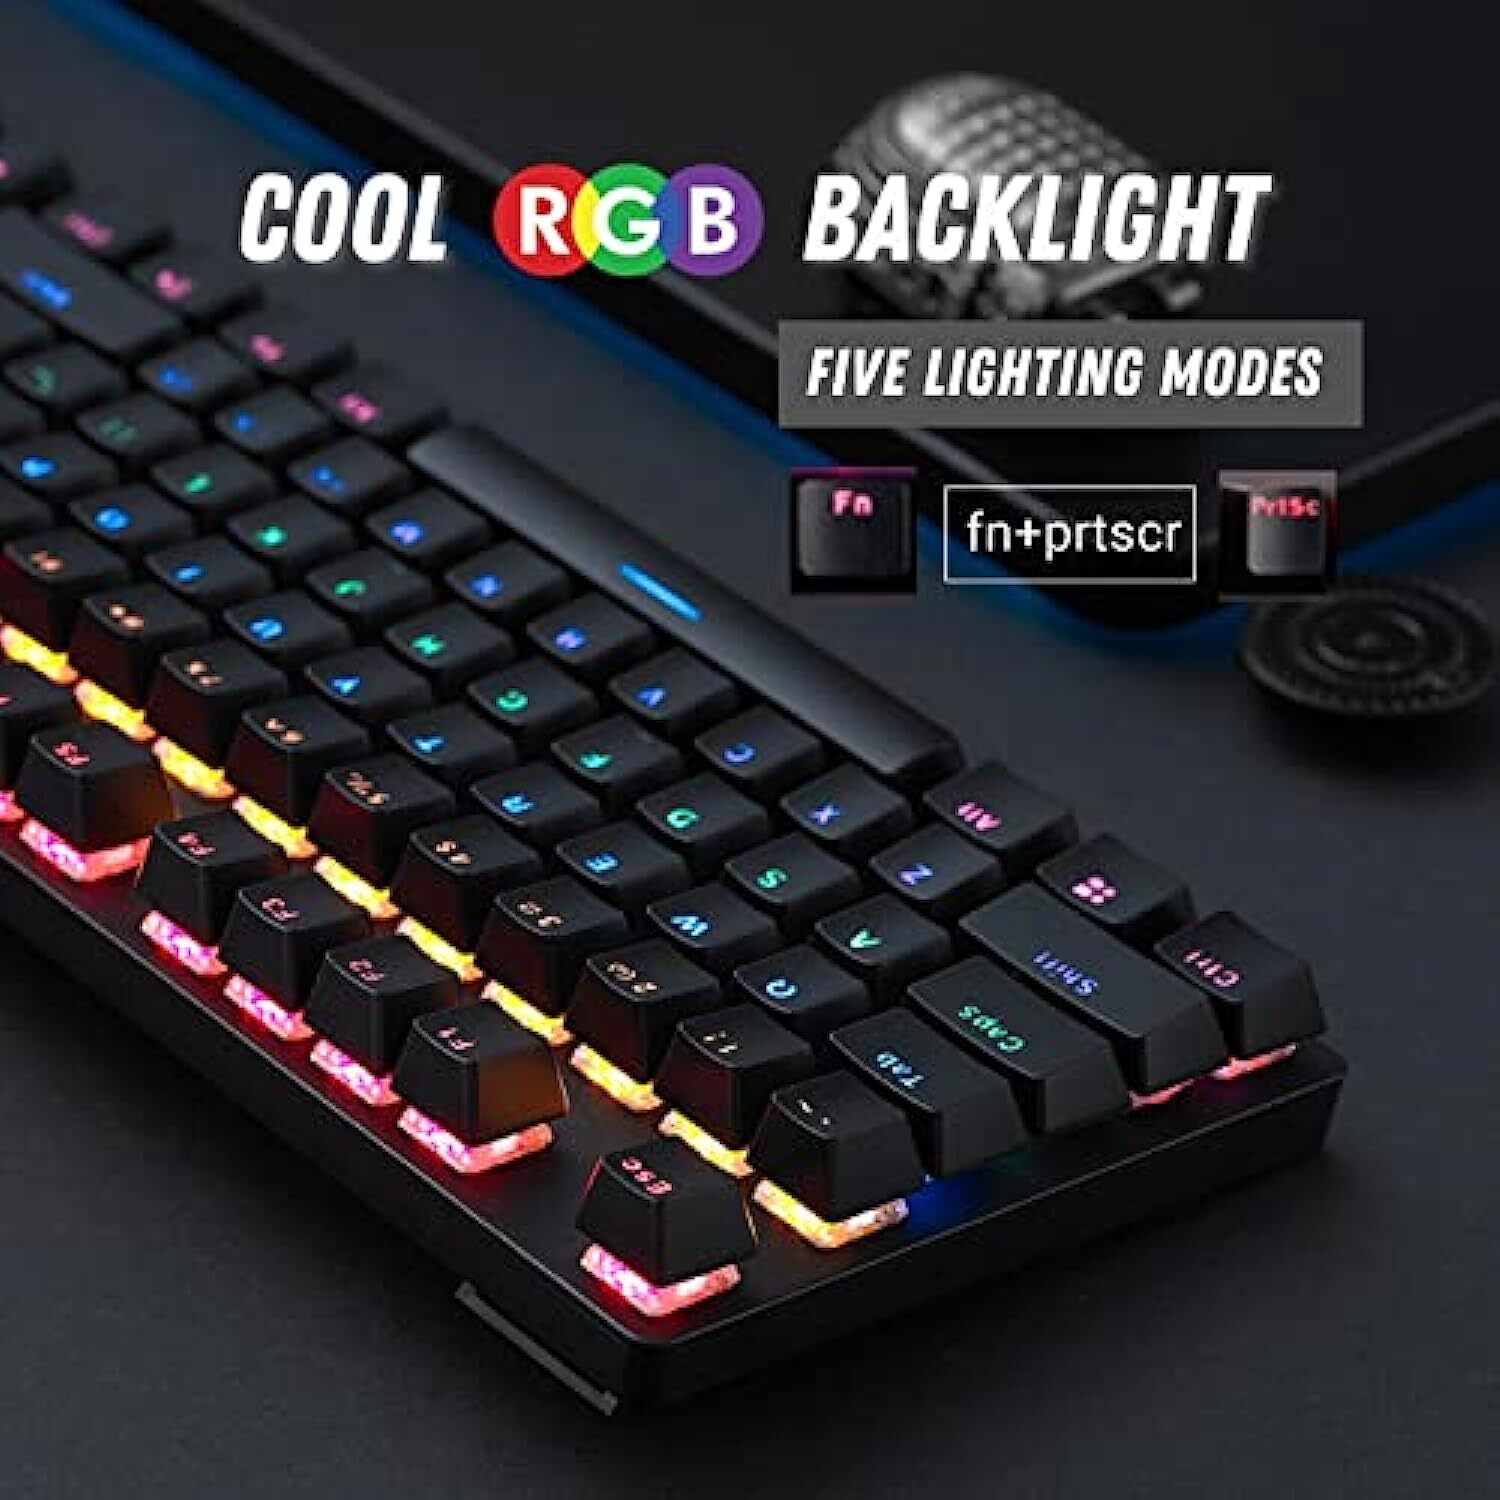 Rapoo V500 PRO Full Size RGB Mechanical Gaming Keyboard -Spill Resistant, Anti-Ghosting, Conflict Free Design, Compatible with Windows, macOS - Black